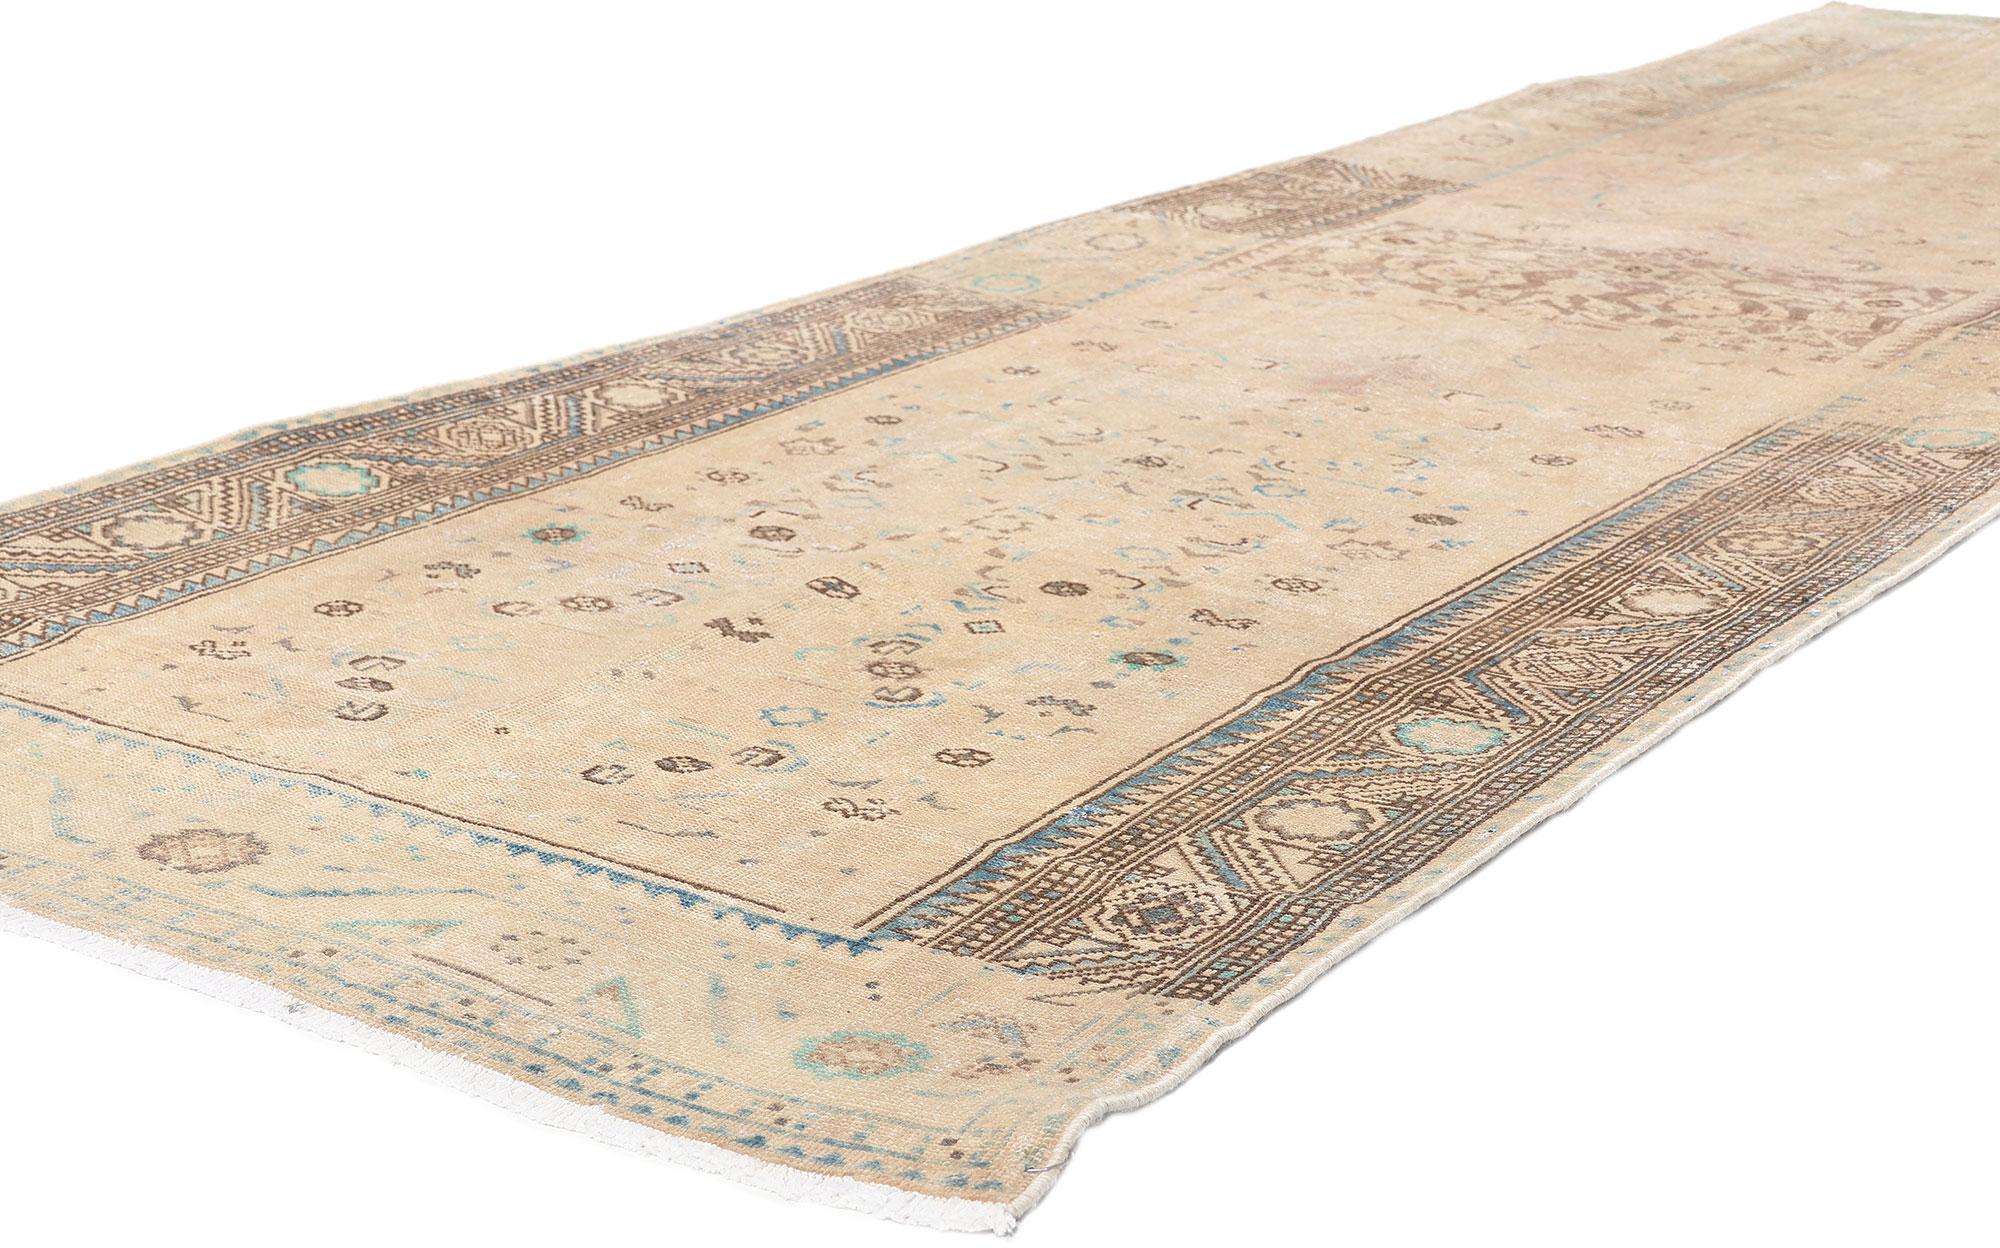 61267 Vintage Persian Malayer Rug, 03'04 x 10'06.
​Faded elegance meets relaxed refinement in this hand knotted wool distressed vintage Persian Malayer rug runner.

Rendered in variegated shades of tan, brown, cerulean, beige, Aegean blue, ecru,